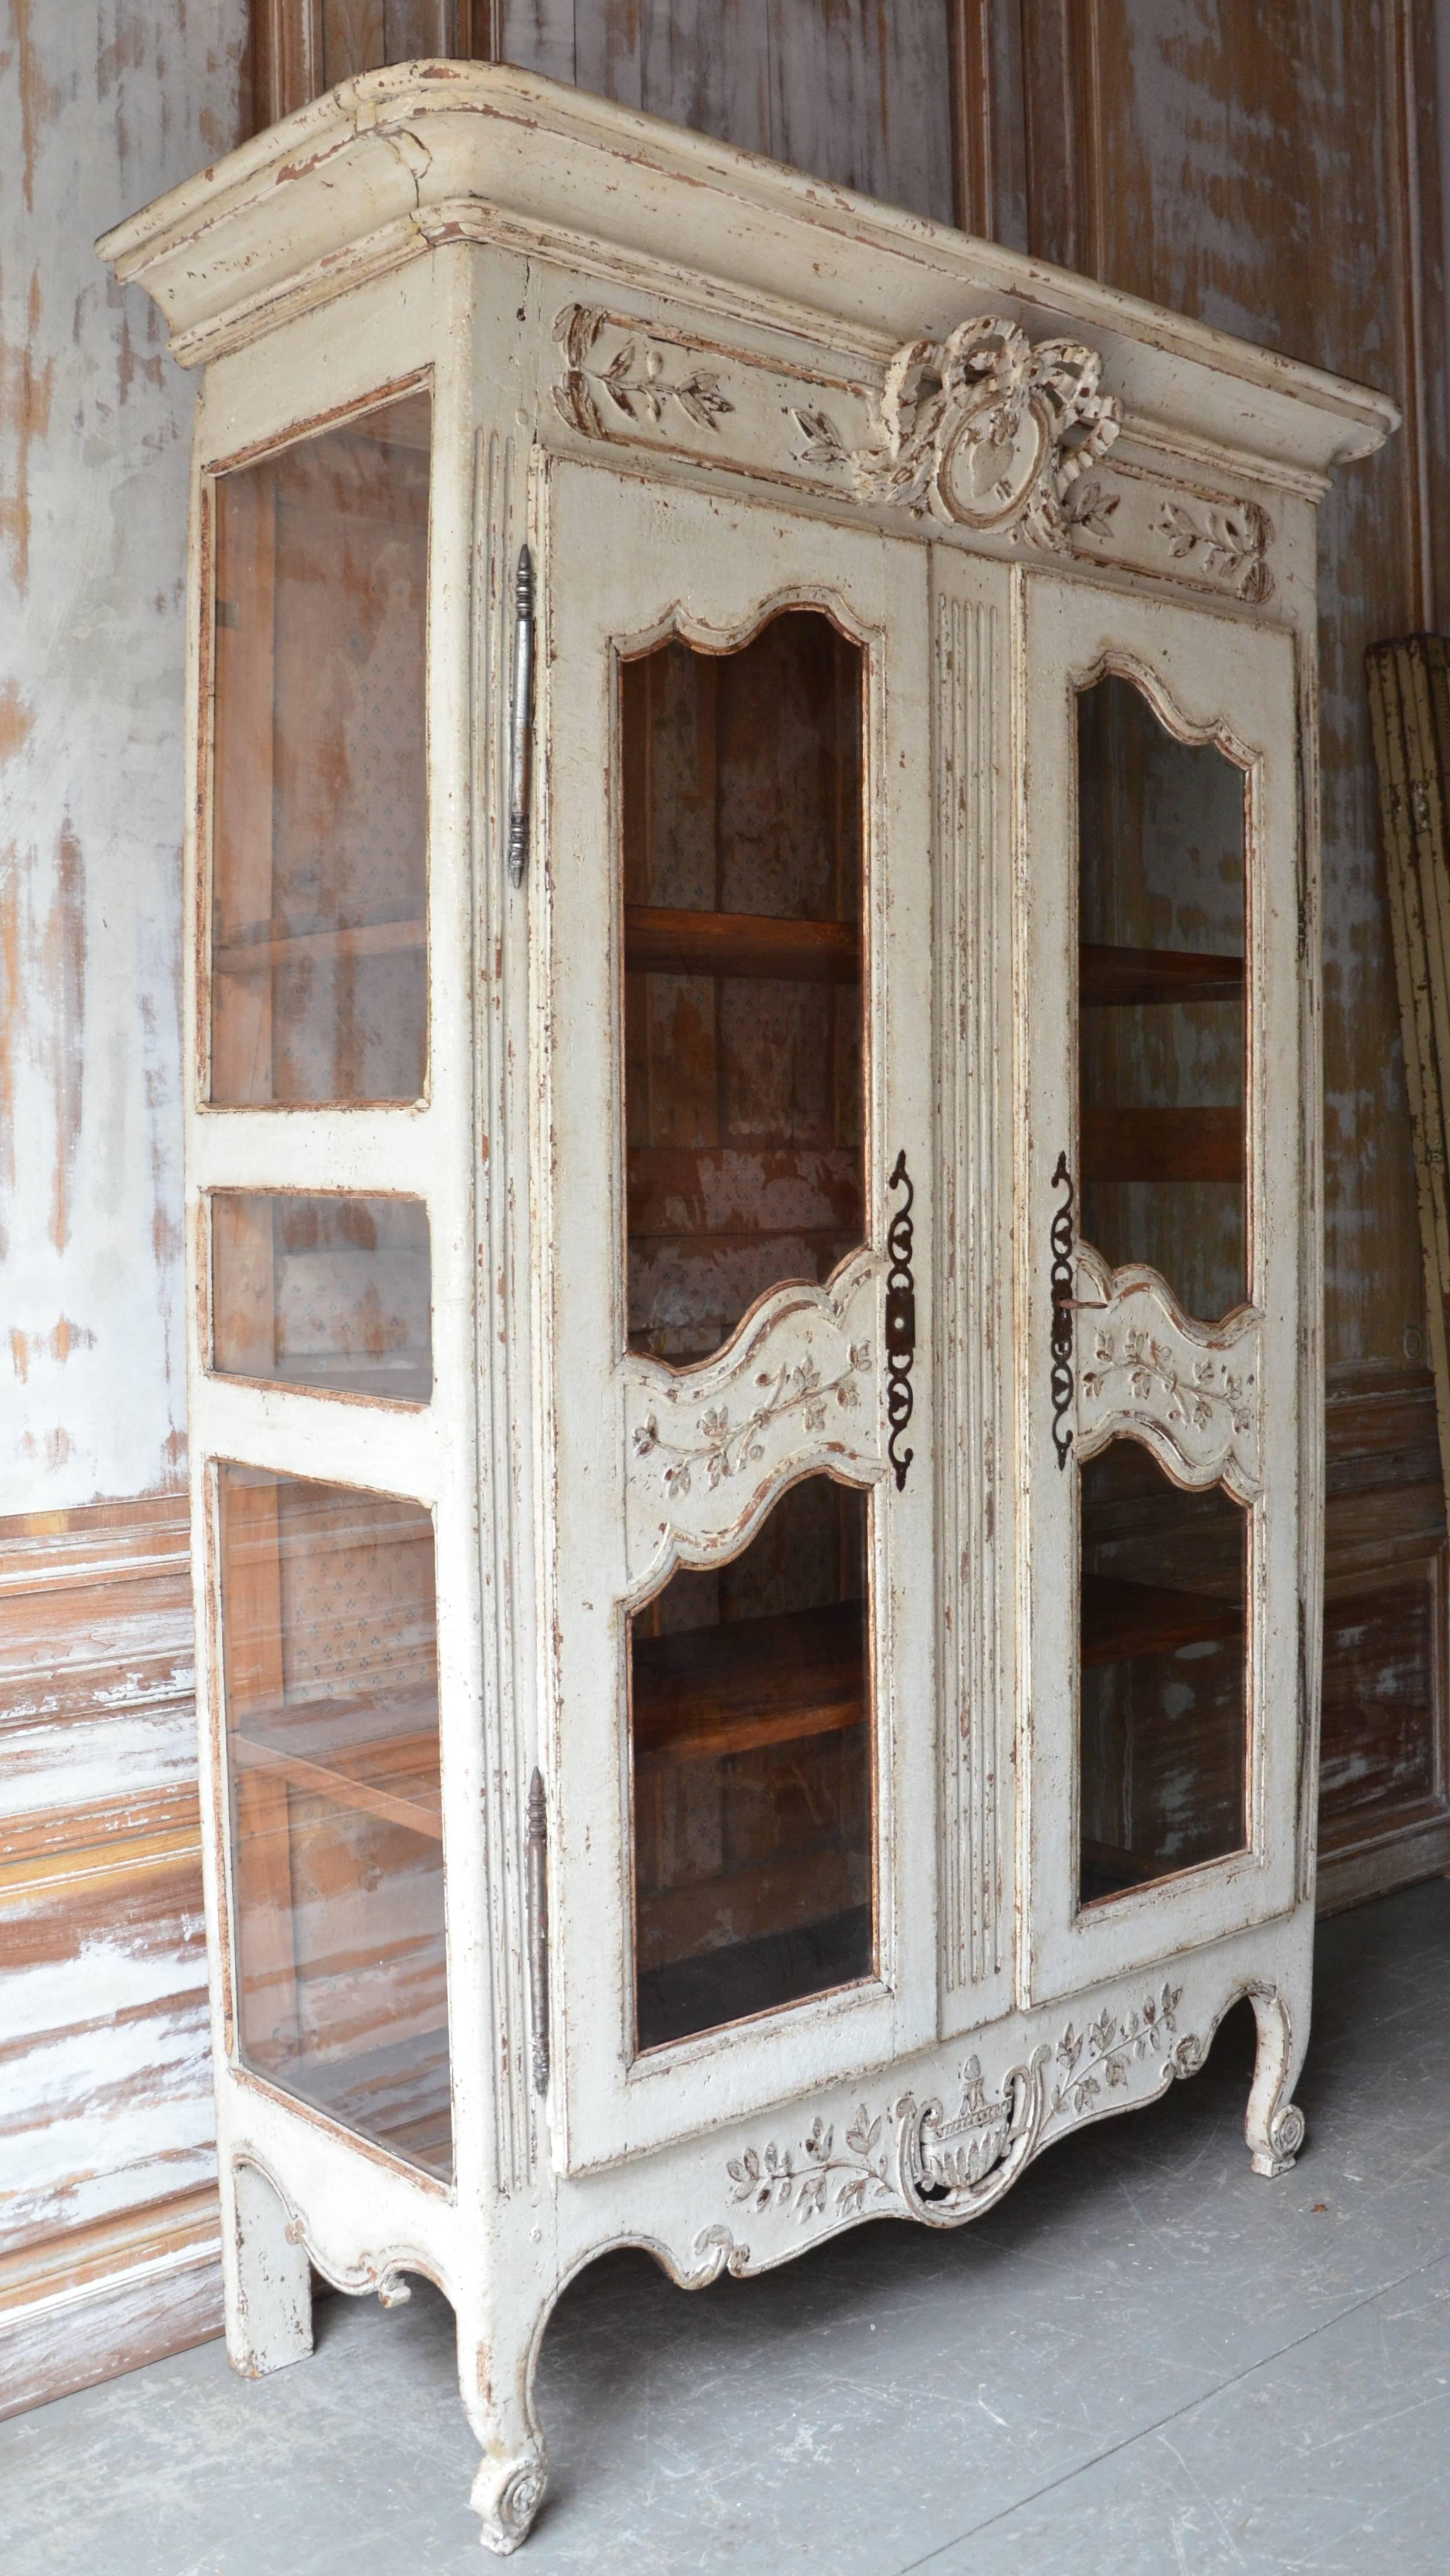 18th century French Louis XV-style Bibliothèque/Vitrine in painted walnut wood with double glass doors, glass side panels, carved heart in relief to symbolize love, richly carved apron, original hardwares and three inside shelves. Part of the